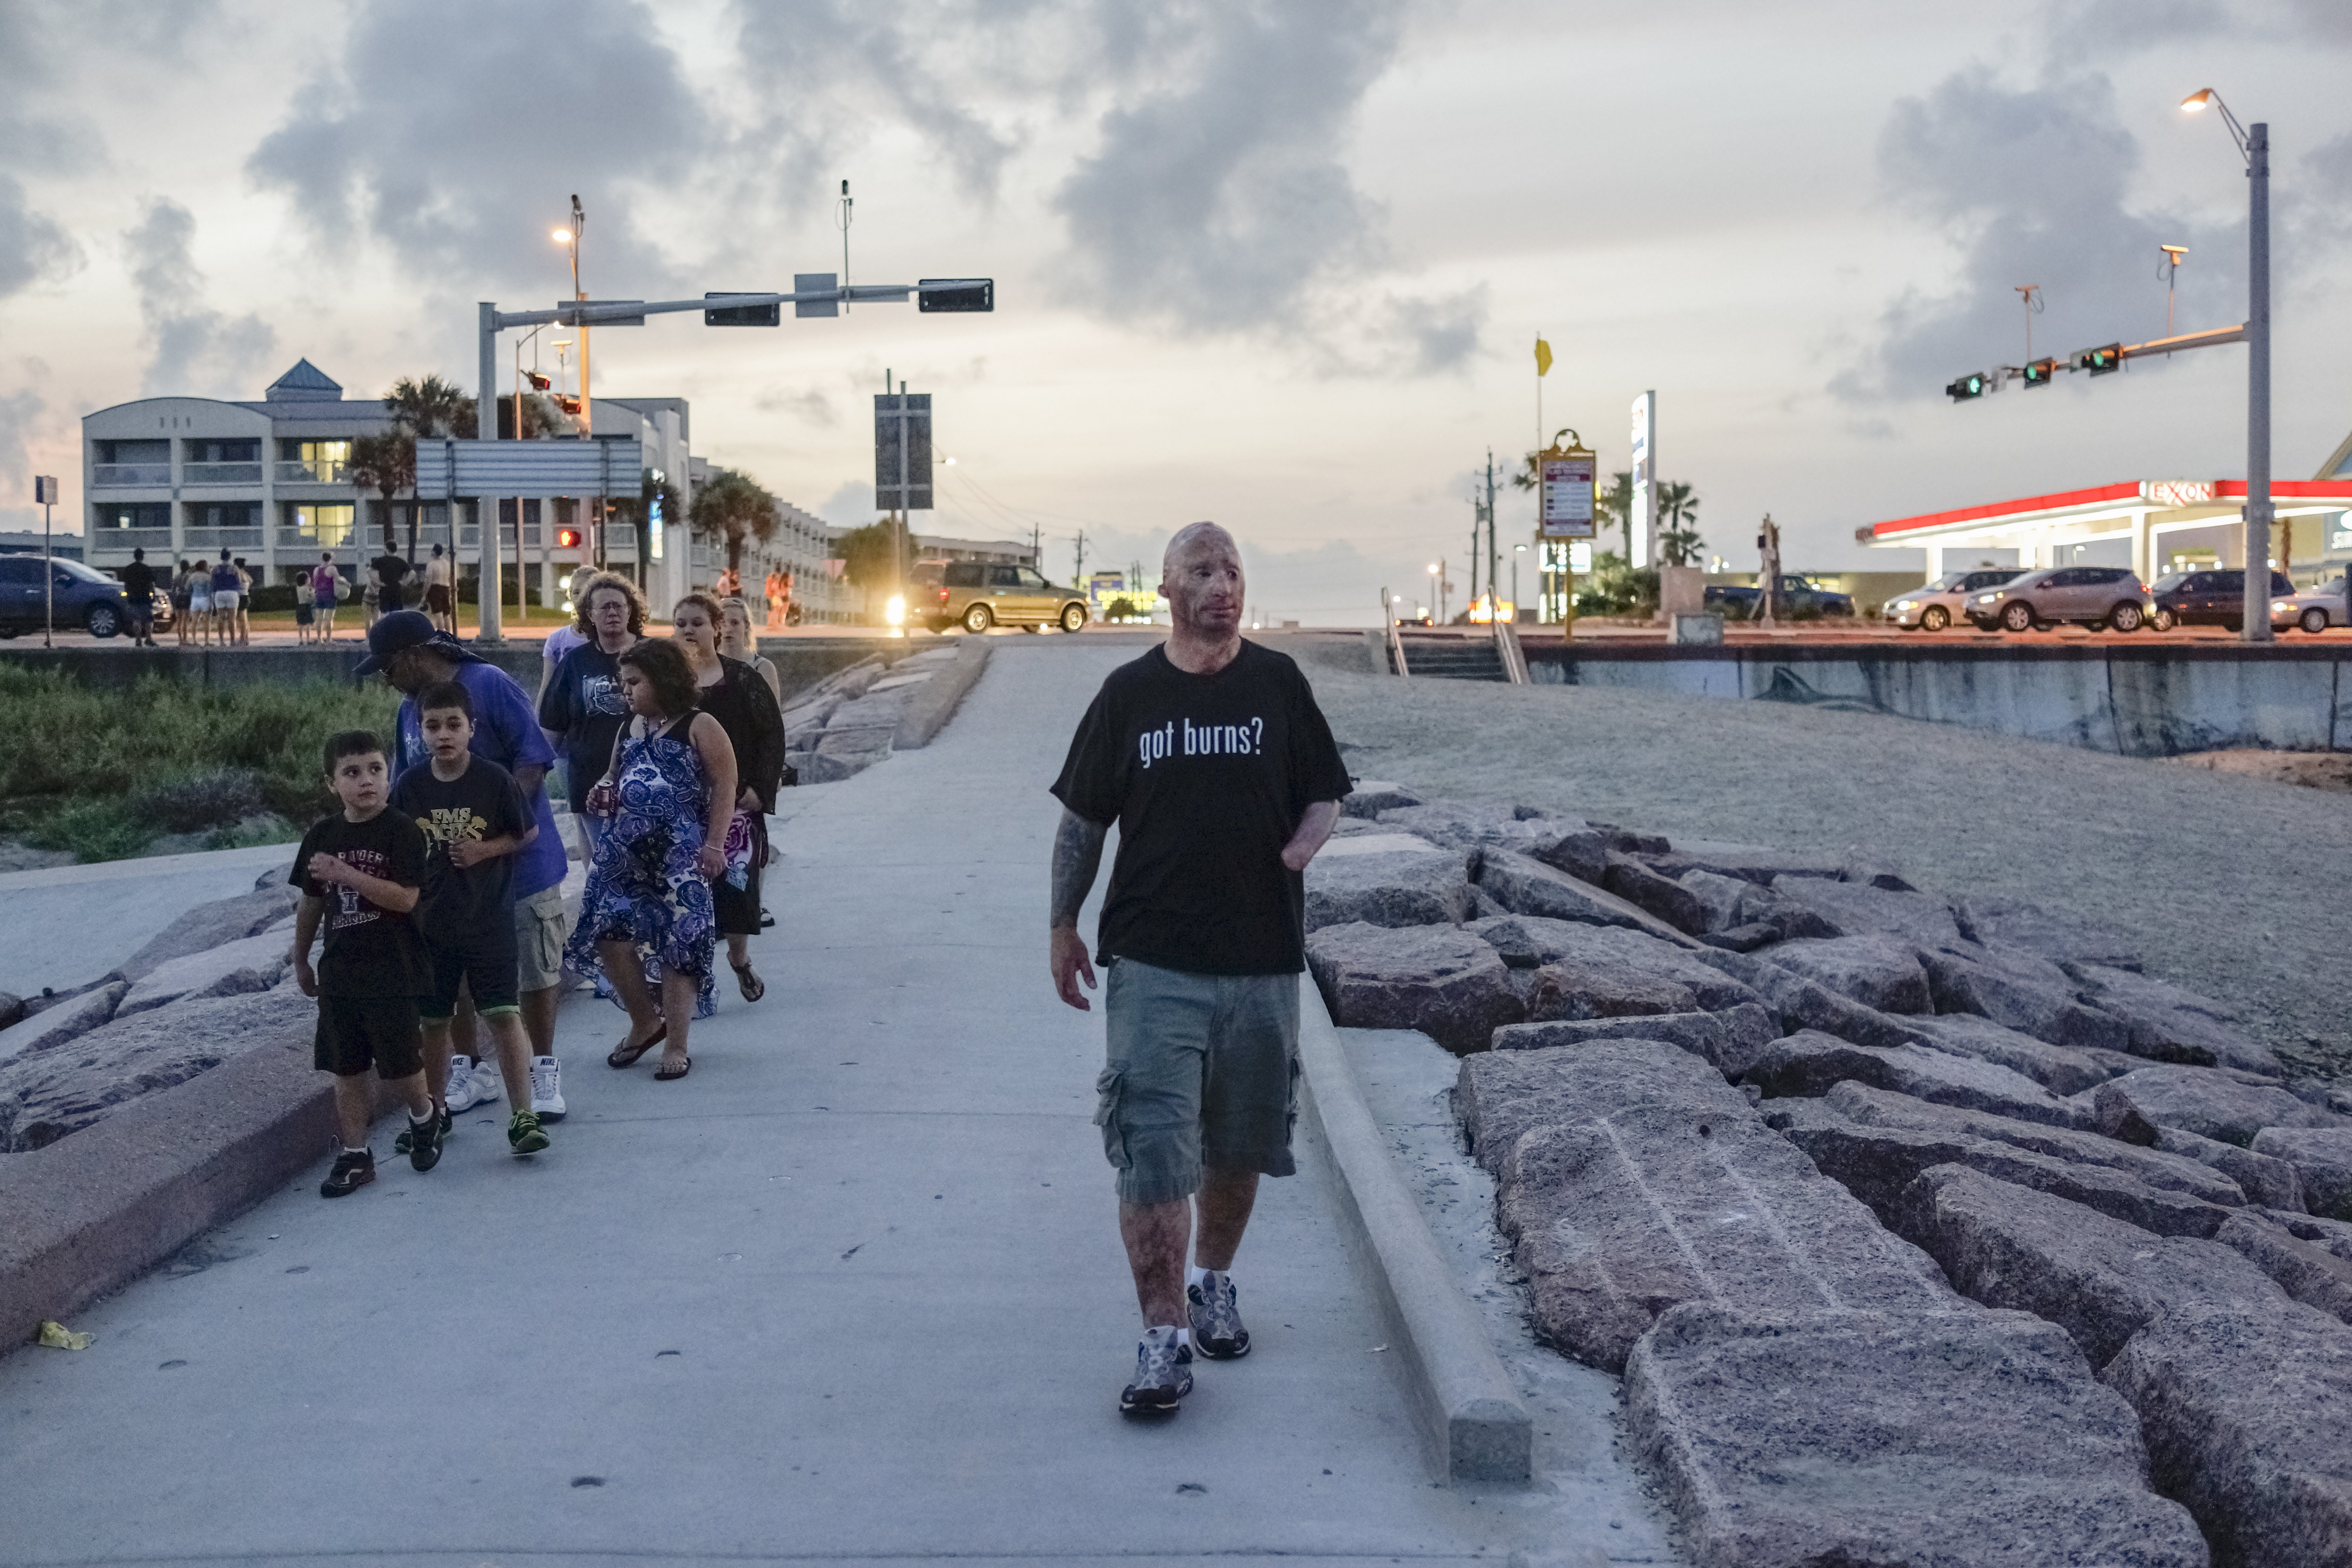 Bobby walks along the beach after visiting Grant, a 12-year old who was burned as a toddler. Grant was having surgery the next day, so Bobby visited him in his hotel in Galveston to cheer him up. 2013.